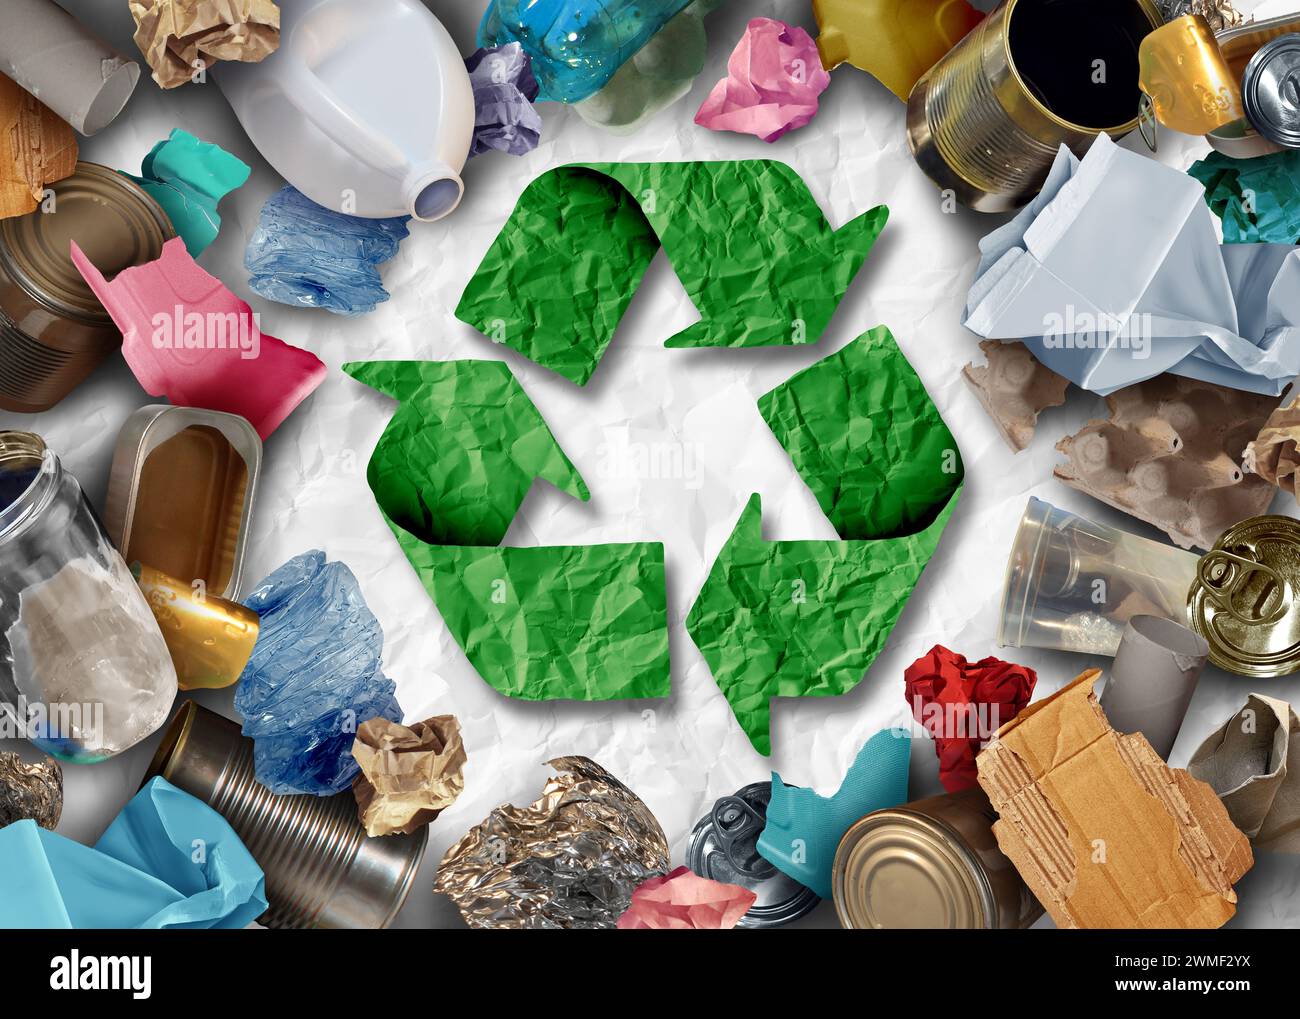 Recycling Social Issue to recycle waste and garbage as reusable items management as old paper glass metal and plastic thrown in a garbage container Stock Photo